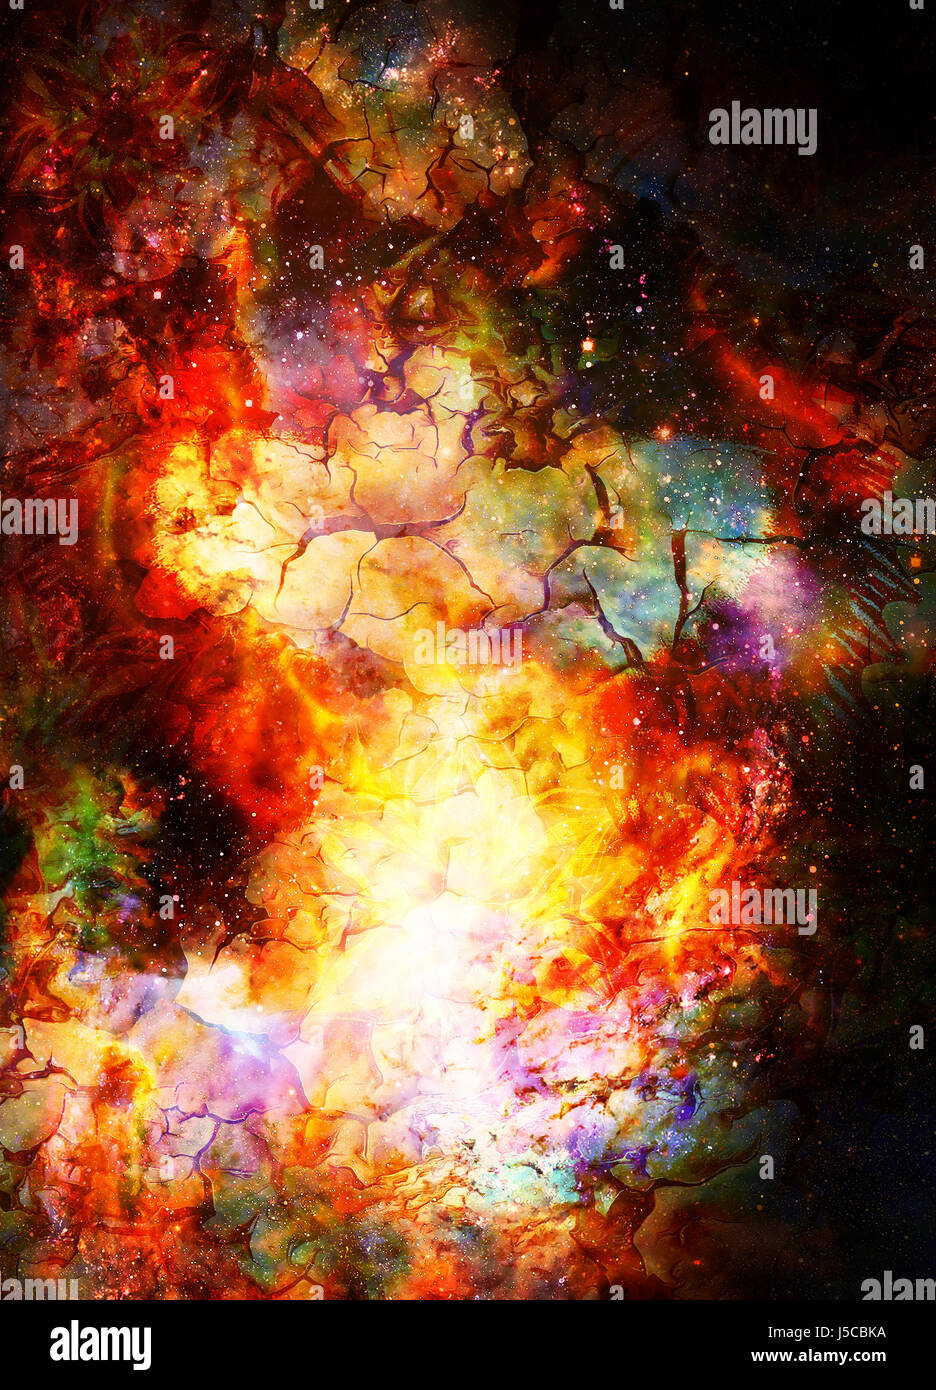 Cosmic space and stars, color cosmic abstract background. Crackle and fire effect Stock Photo